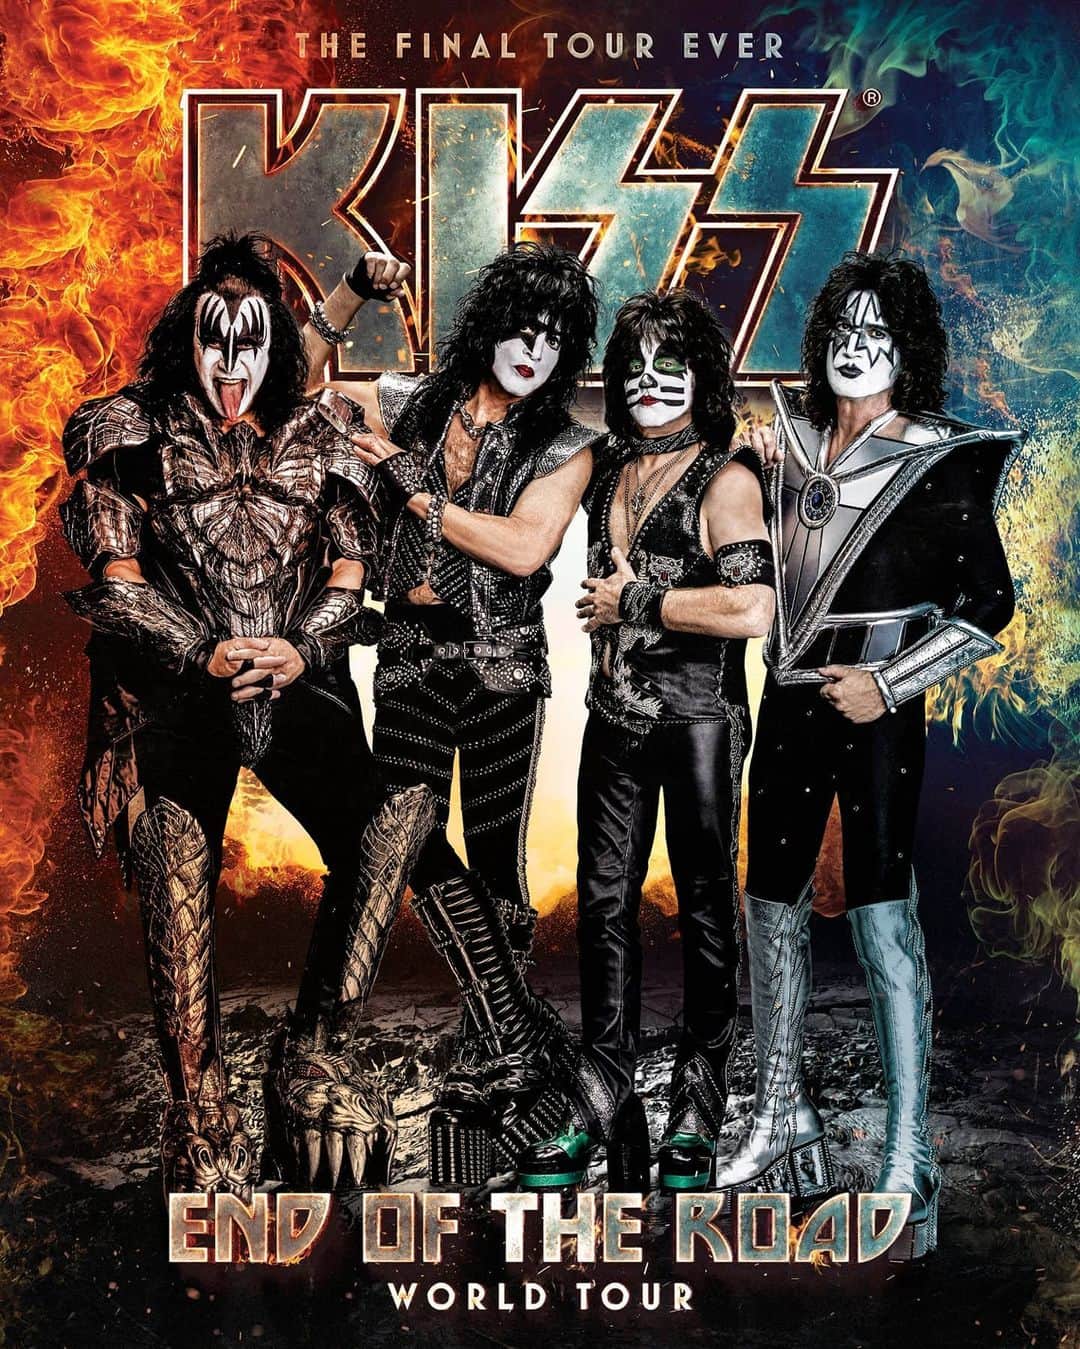 KISSさんのインスタグラム写真 - (KISSInstagram)「JUST ANNOUNCED! Rescheduled & New #EndOfTheRoad European Dates for 2021   We are excited to announce rescheduled and new European dates for 2021. Further dates will also be added to the cities announced today.  Paul Stanley says, “We are waiting. We are ready. When we are told everyone is safe and this pandemic is over, we will shake the earth and rock your world as always and as never before.”  Gene Simmons says, “We can't wait for this pandemic to be over, and for all of you to be safe. We are planning to rock your world, once it is safe out there, for all of you and for us. See you in Europe”  KISS END OF THE ROAD 2021 rescheduled and new European dates announced today are below. With more dates to be added.  June 2 -   Sportspalais - Antwerp,  BELGIUM June 8 -   Accors Hotel Arena - Paris, FRANCE June 10 - Westfalenhalle - Dortmund, GERMANY June 12 -  Atlas Arena - Lodz, POLAND June 15 - Barclaycard Arena - Hamburg, GERMANY June 19 - Tele 2 Arena - Stockholm, SWEDEN June 21 - Hartwell Arena - Helsinki, FINLAND June 23 - Scandanavian - Gothenburg, SWEDEN June 25 - Festhalle - Frankfurt, GERMANY June 30 - Hallenstadion - Zurich, SWITZERLAND July 3 -    Rockfest - Barcelona, SPAIN July 4 -    Wizink Arena - Madrid, SPAIN July 6 -    Roman Arena - Nimes, FRANCE July 8 -    Schleyerhalle - Stuttgart, GERMANY July 10 -  O2 Arena - Prague, CZECH REPUBLIC July 12 -  Arena Di Verona - Verona, ITALY July 15 -  Budapest Arena - Budapest, HUNGARY  KISS will be offering VIP experiences and special KISS Army fan presales. VIP experiences may include a personal photo opportunity with the band, access to an exclusive pre-show lounge and a behind the scenes tour.  Visit www.kissonline.com/tour for more information.   Unfortunately, due to scheduling issues involved with moving the tour back a year KISS will not be able to play the following cities, that were originally set for 2020.  Sandnes, Norway Kaunas, Lithuania  Lisbon, Portugal Gliwice, Poland Sofia, Bulgaria   Those fans with tickets for the above cities should refer to their ticket office for refunds.」7月20日 17時54分 - kissonline